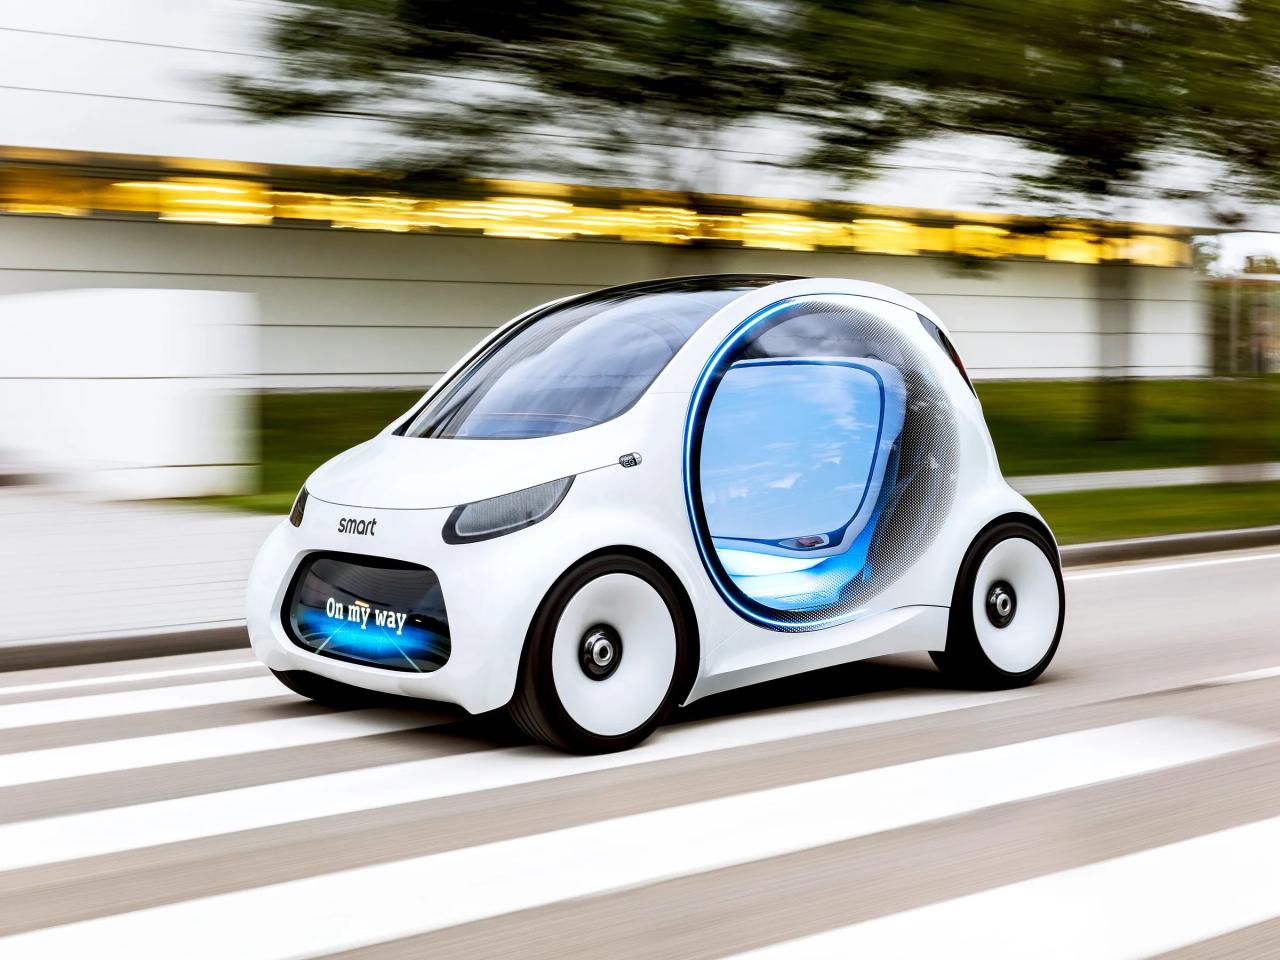 Cars Vehicles: The Future of Transportation